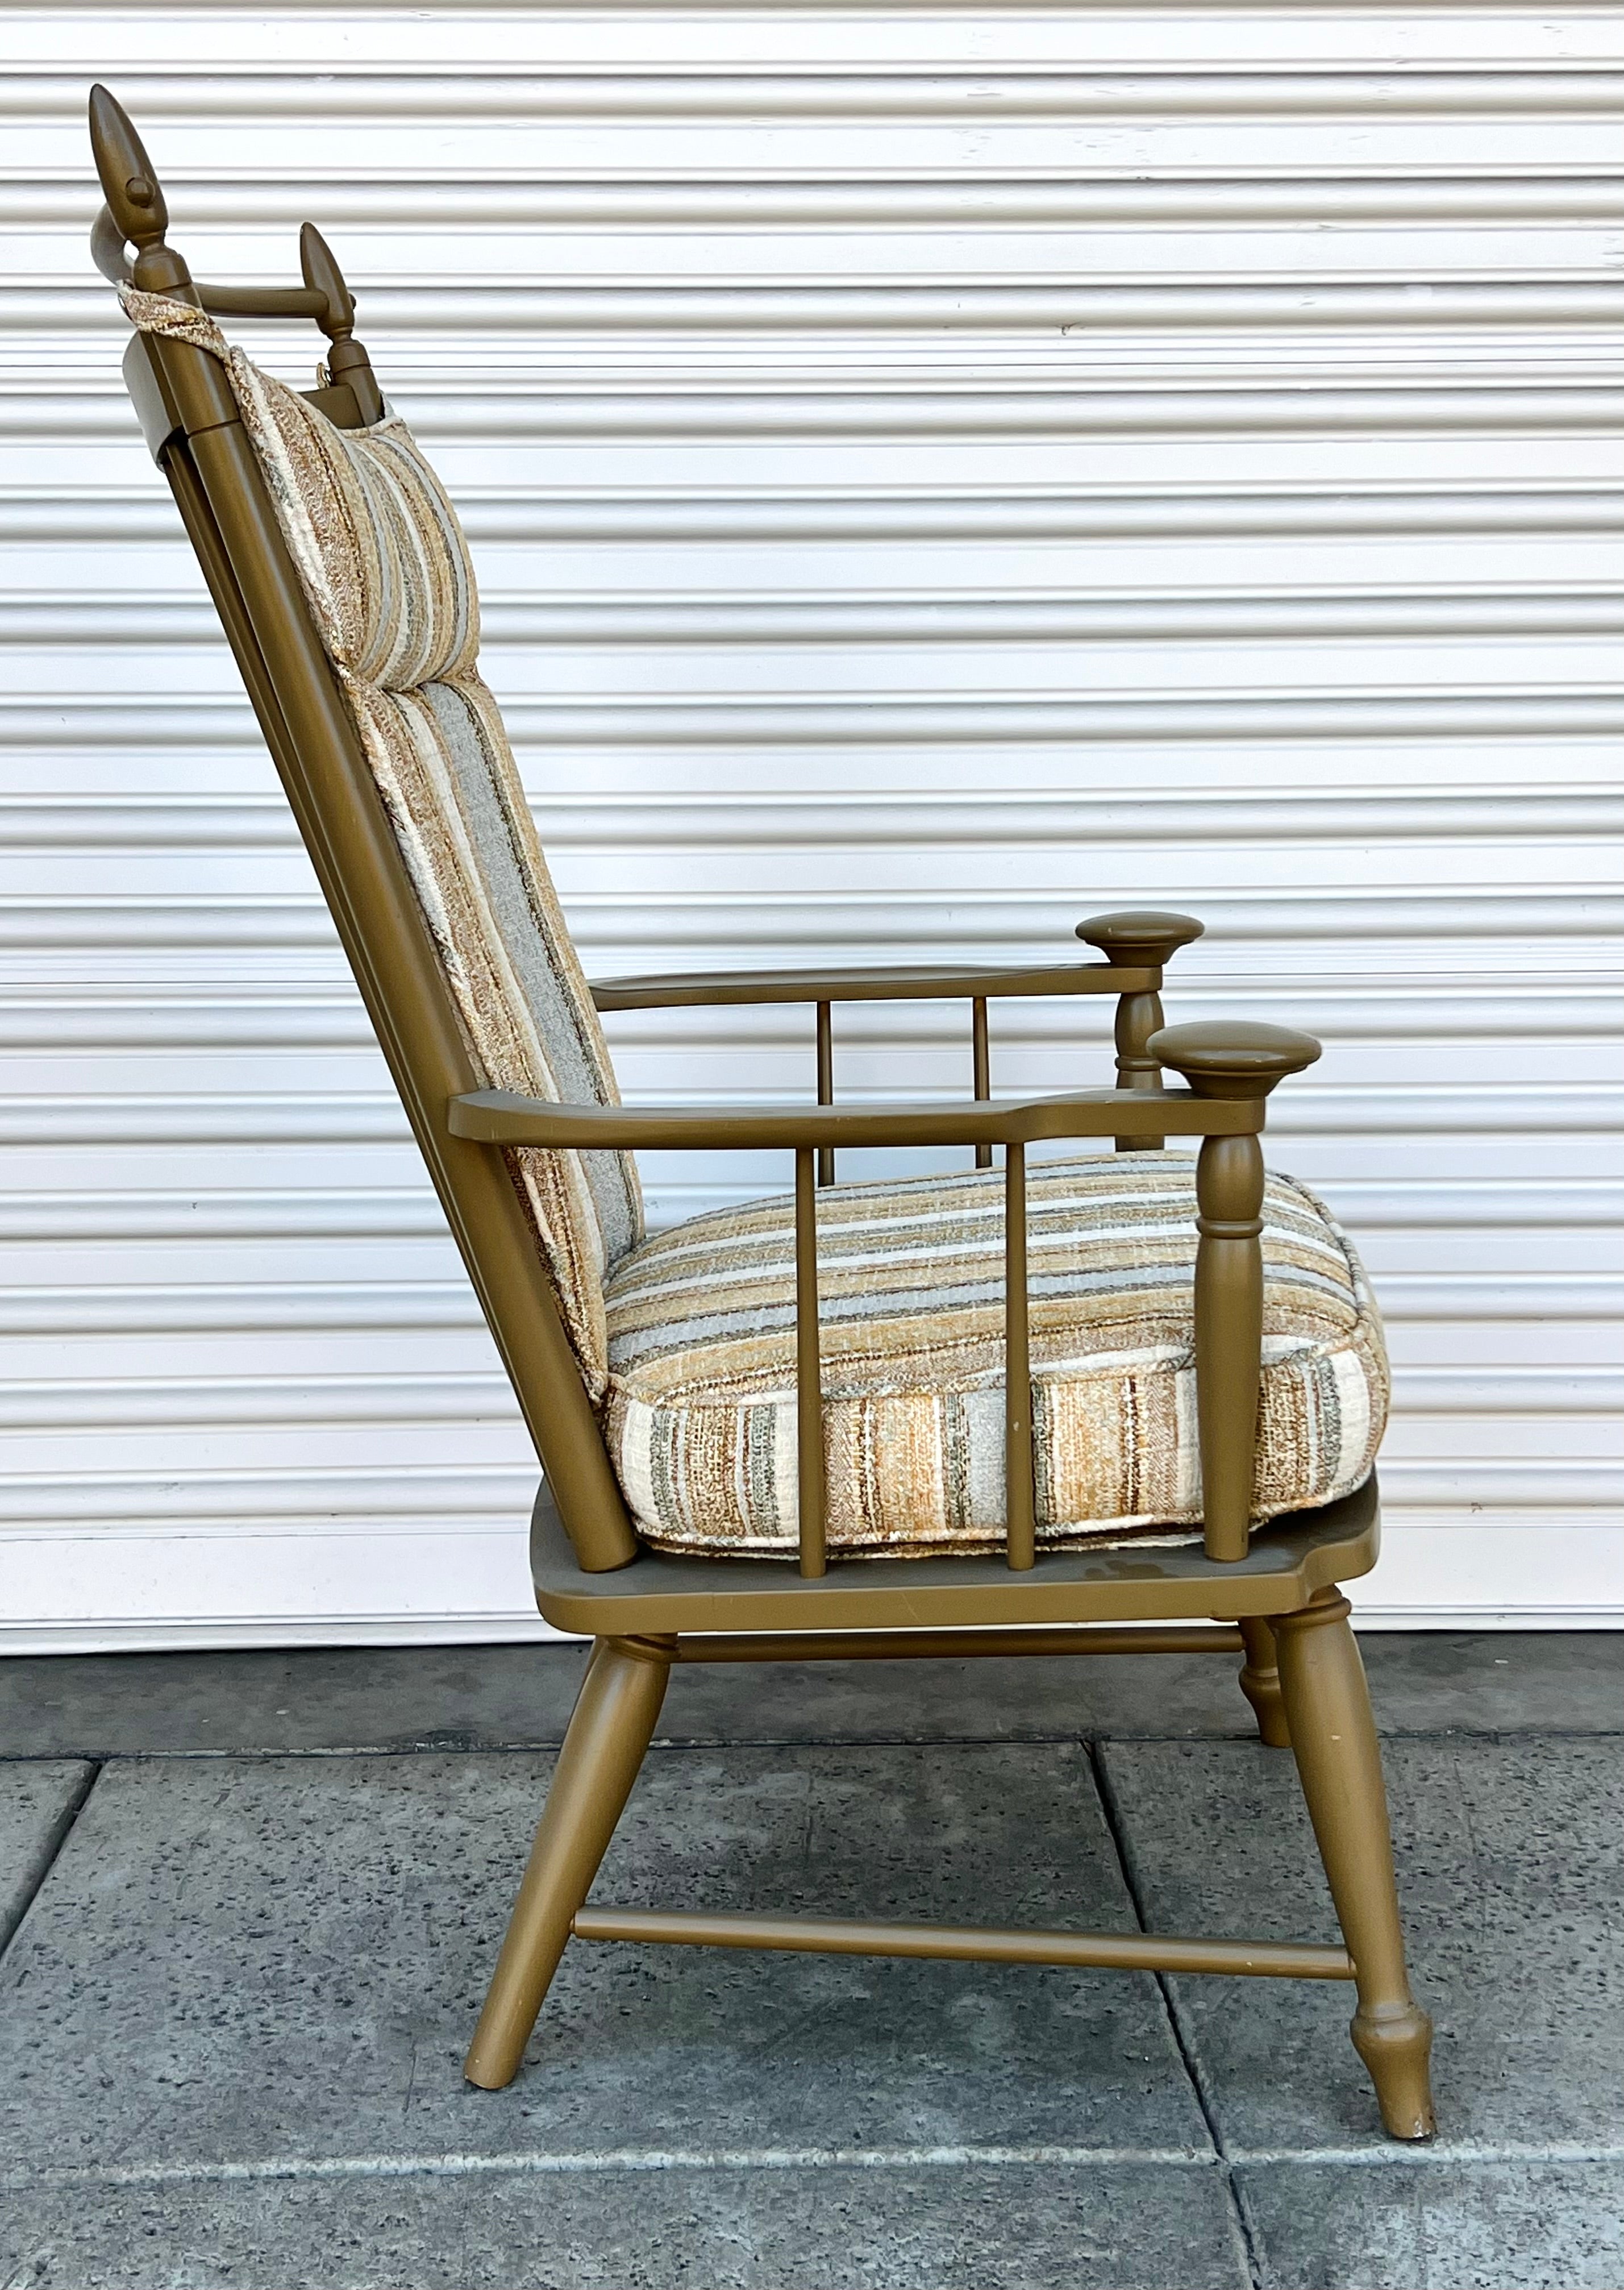 1970s Windsor Neutral Painted Chair (Vintage)